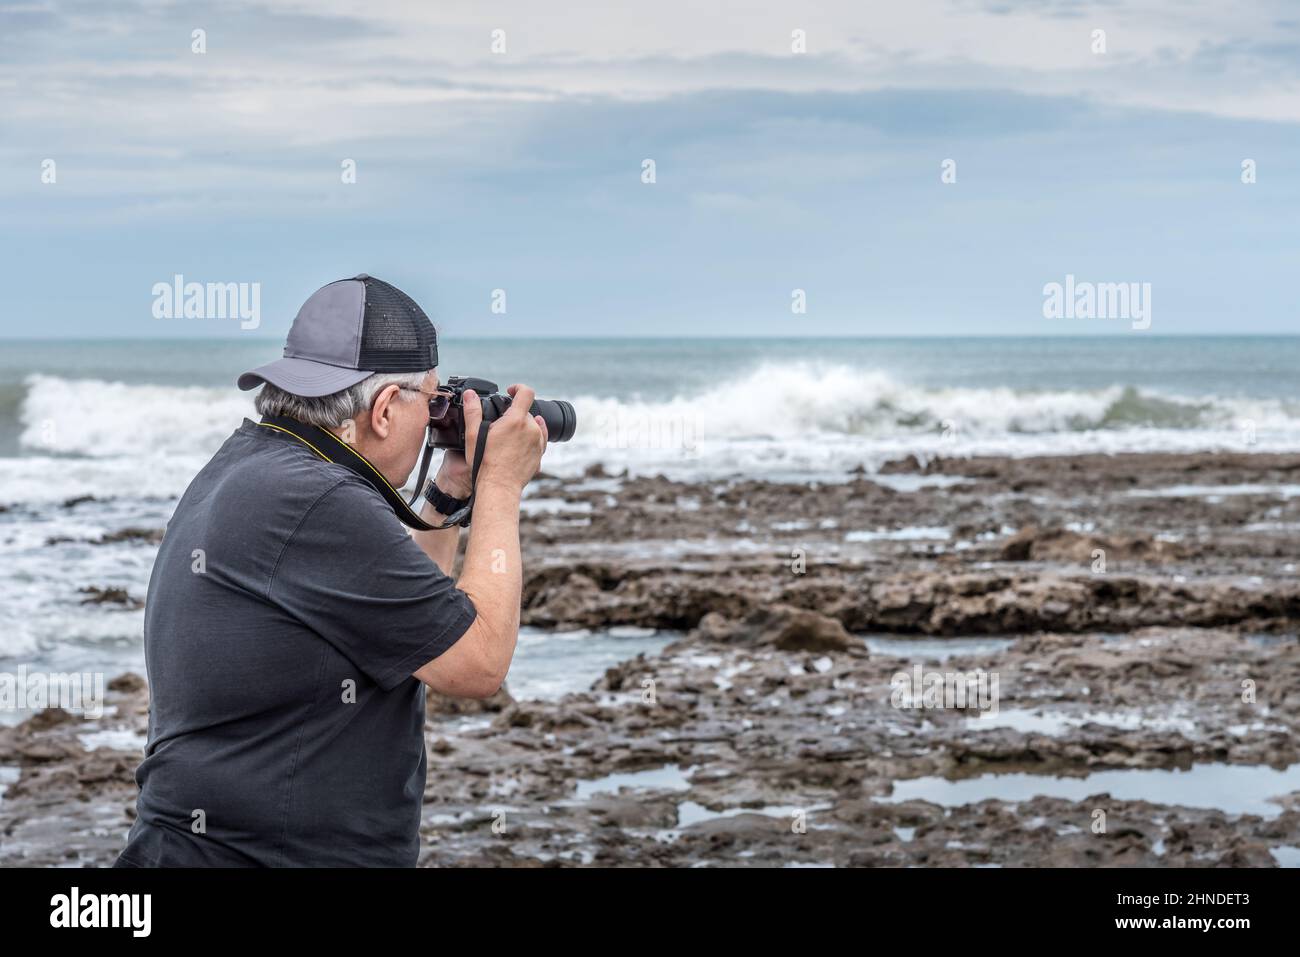 Half body rear view of mature adult male with cap taking a photo on the rocks near the sea. Stock Photo